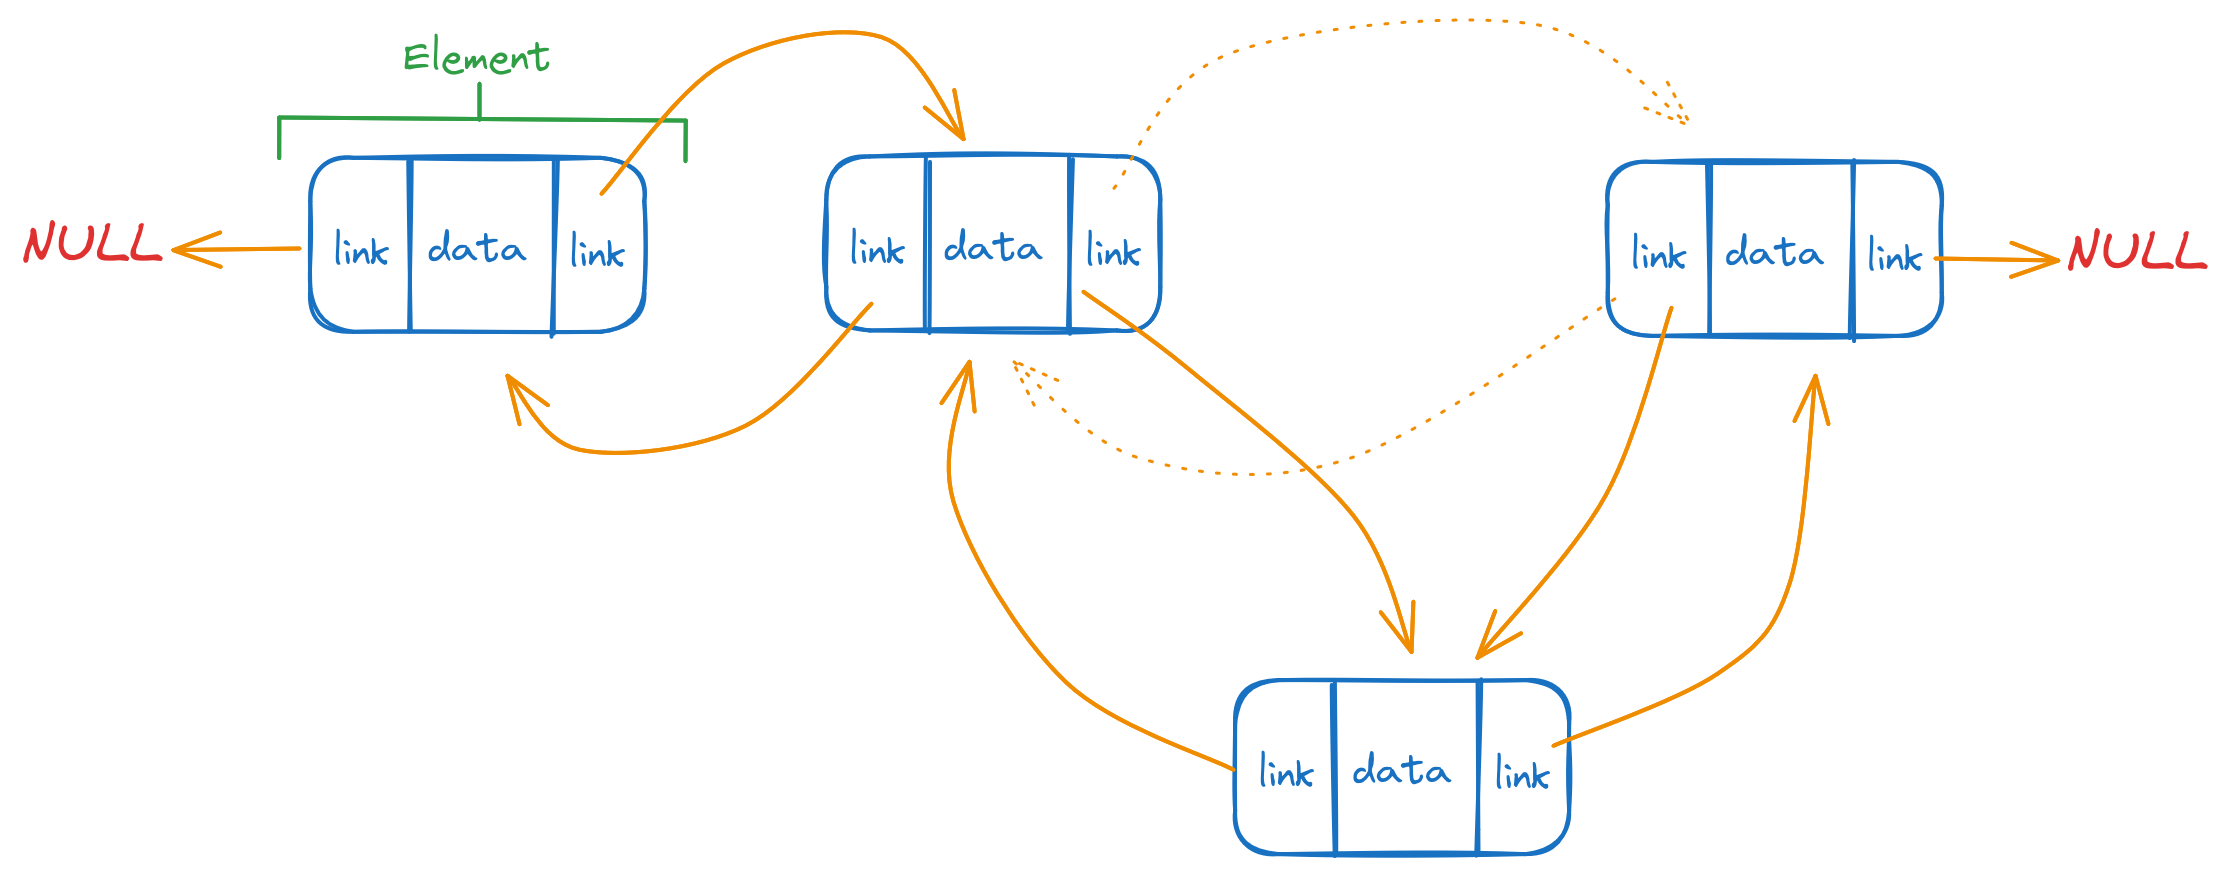 Diagram of a adding an element to a doubly linked list